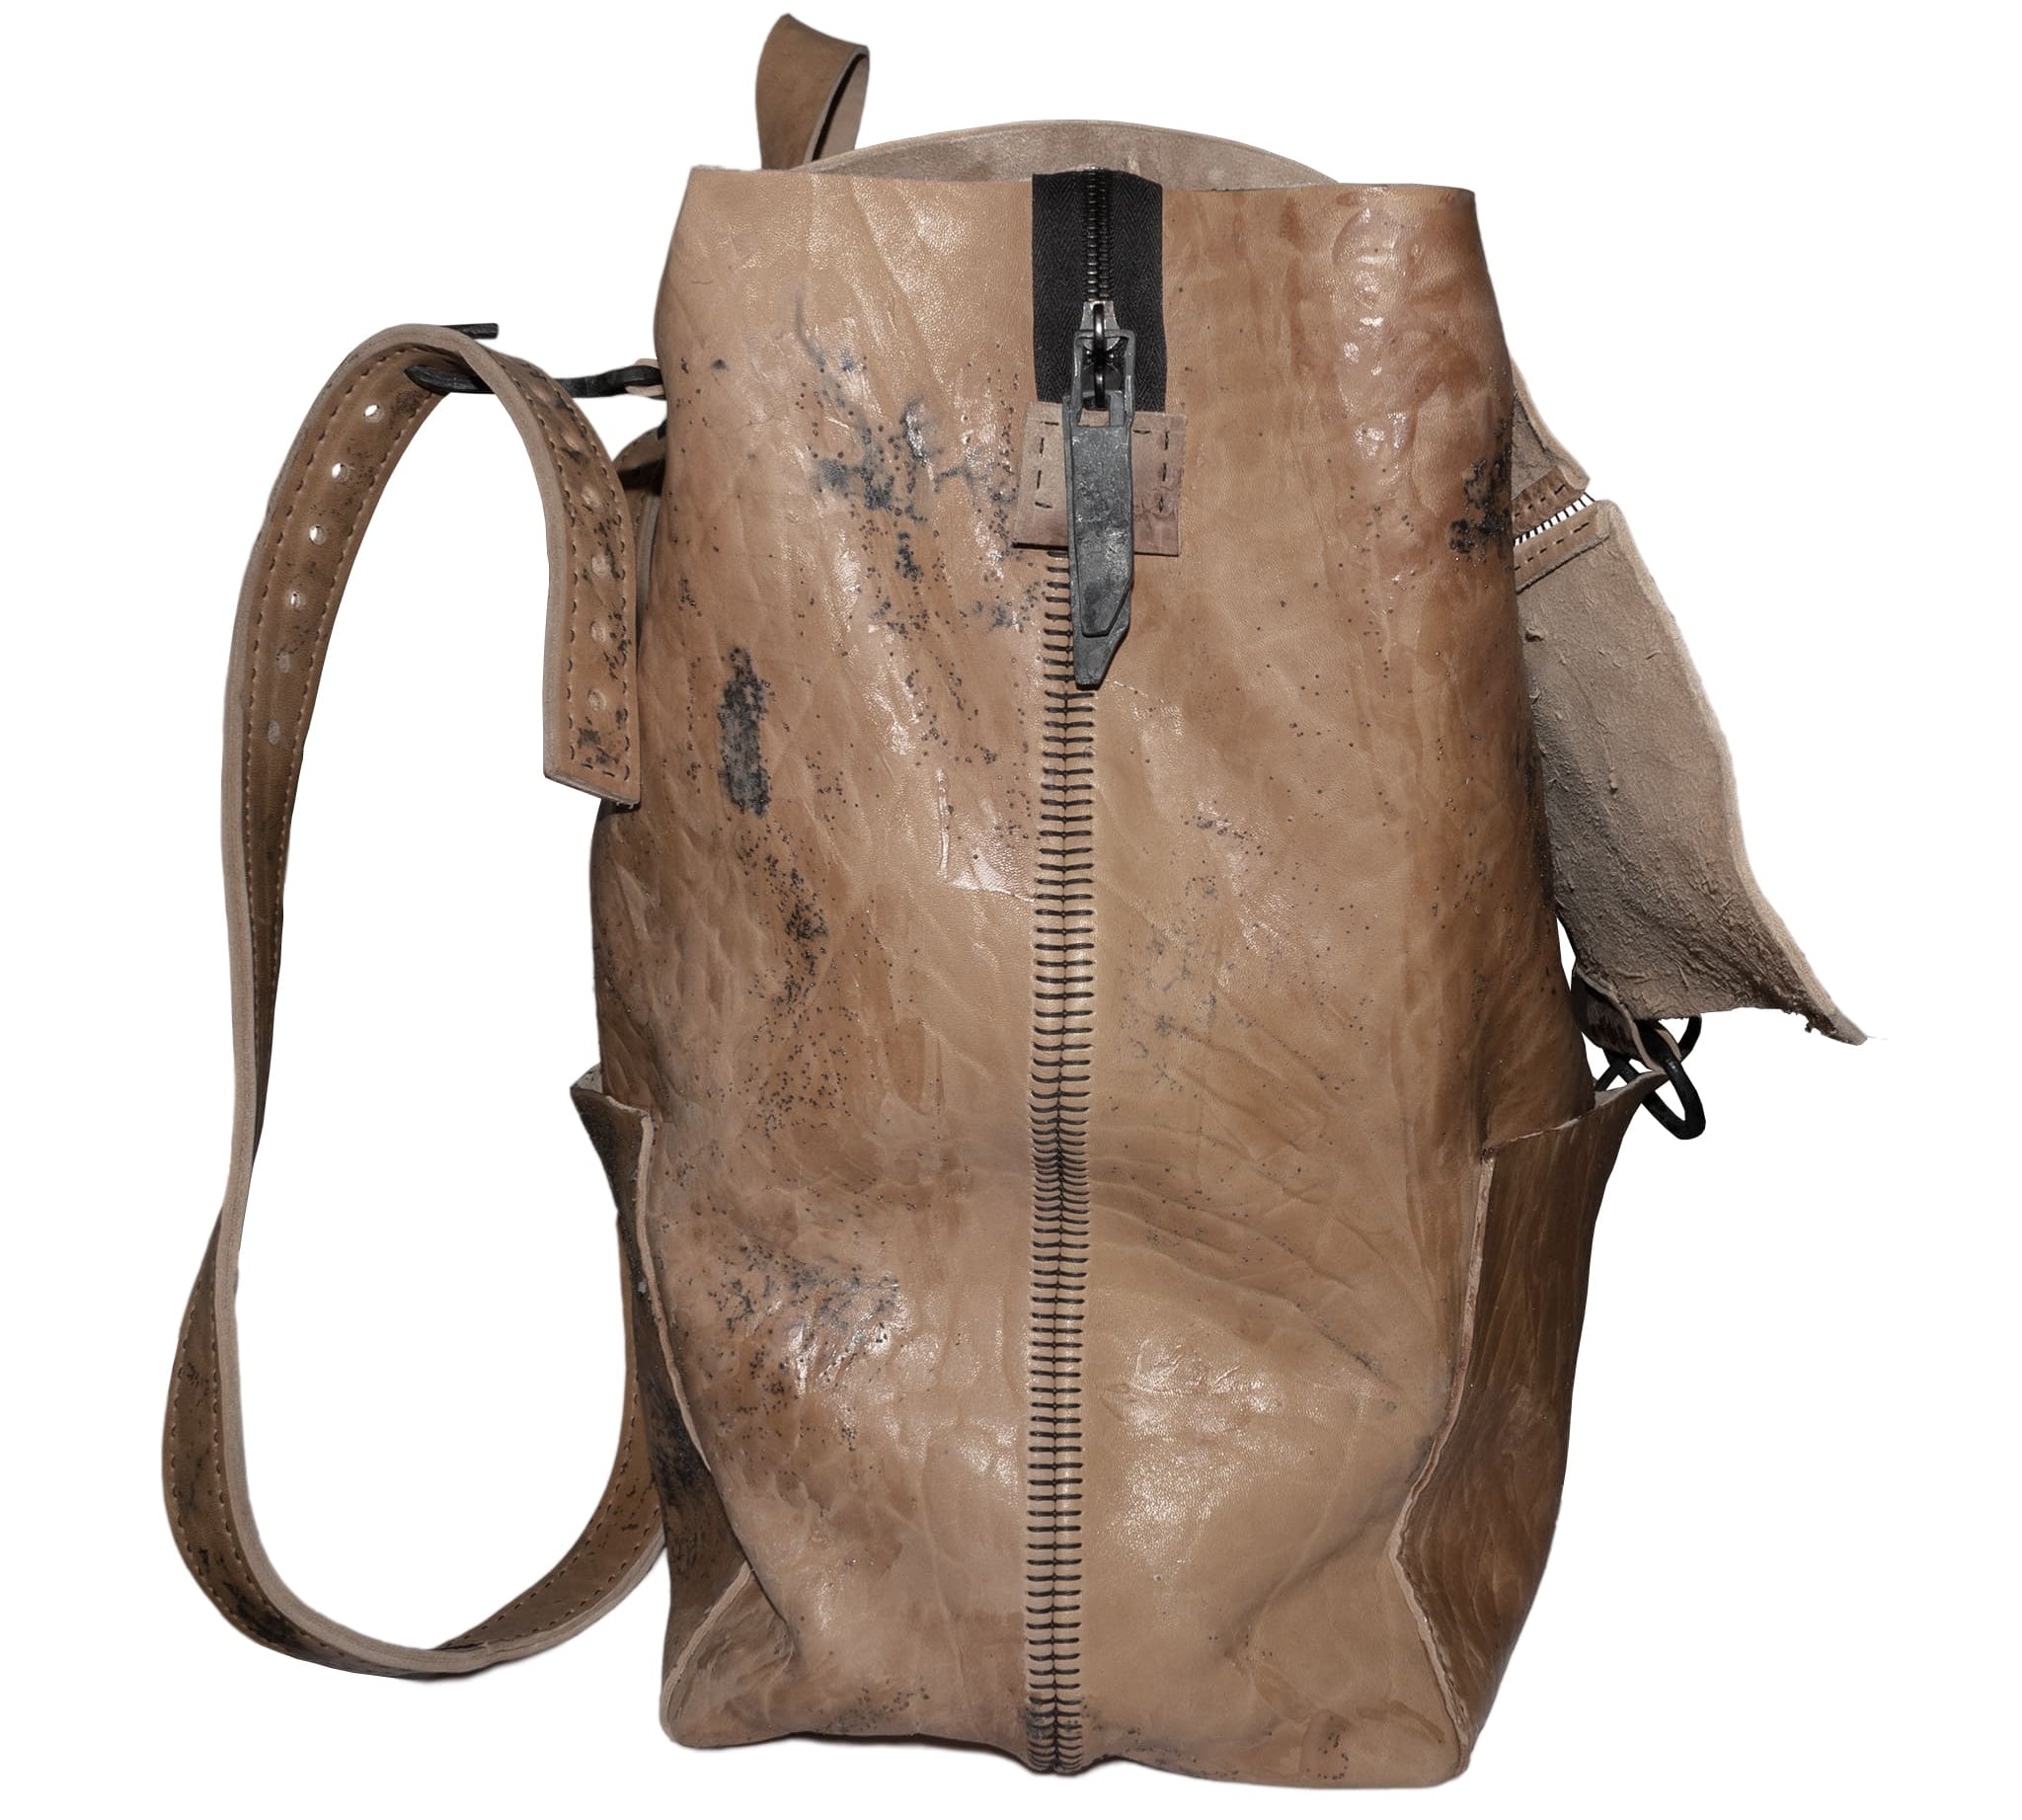 shop and discover our fastidious collection of horse culatta leather backpacks with unique treatments available online at atelierskn.com. An artisanal leather studio offering an array of hand sewn avant garde leather bags, belts, wallets and accessories.